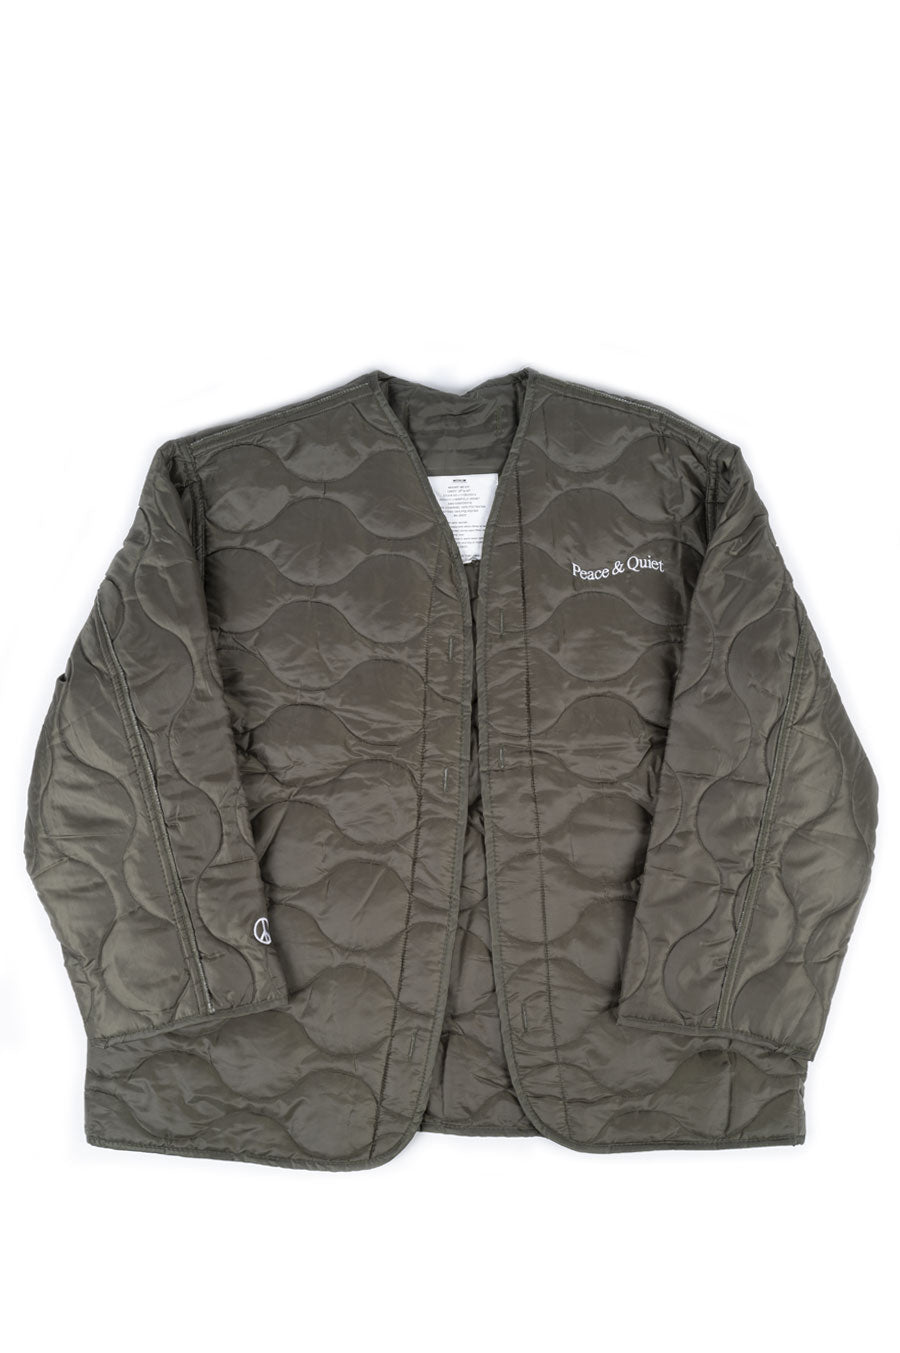 THE MUSEUM OF PEACE AND QUIET WORDMARK LINER JACKET OLIVE